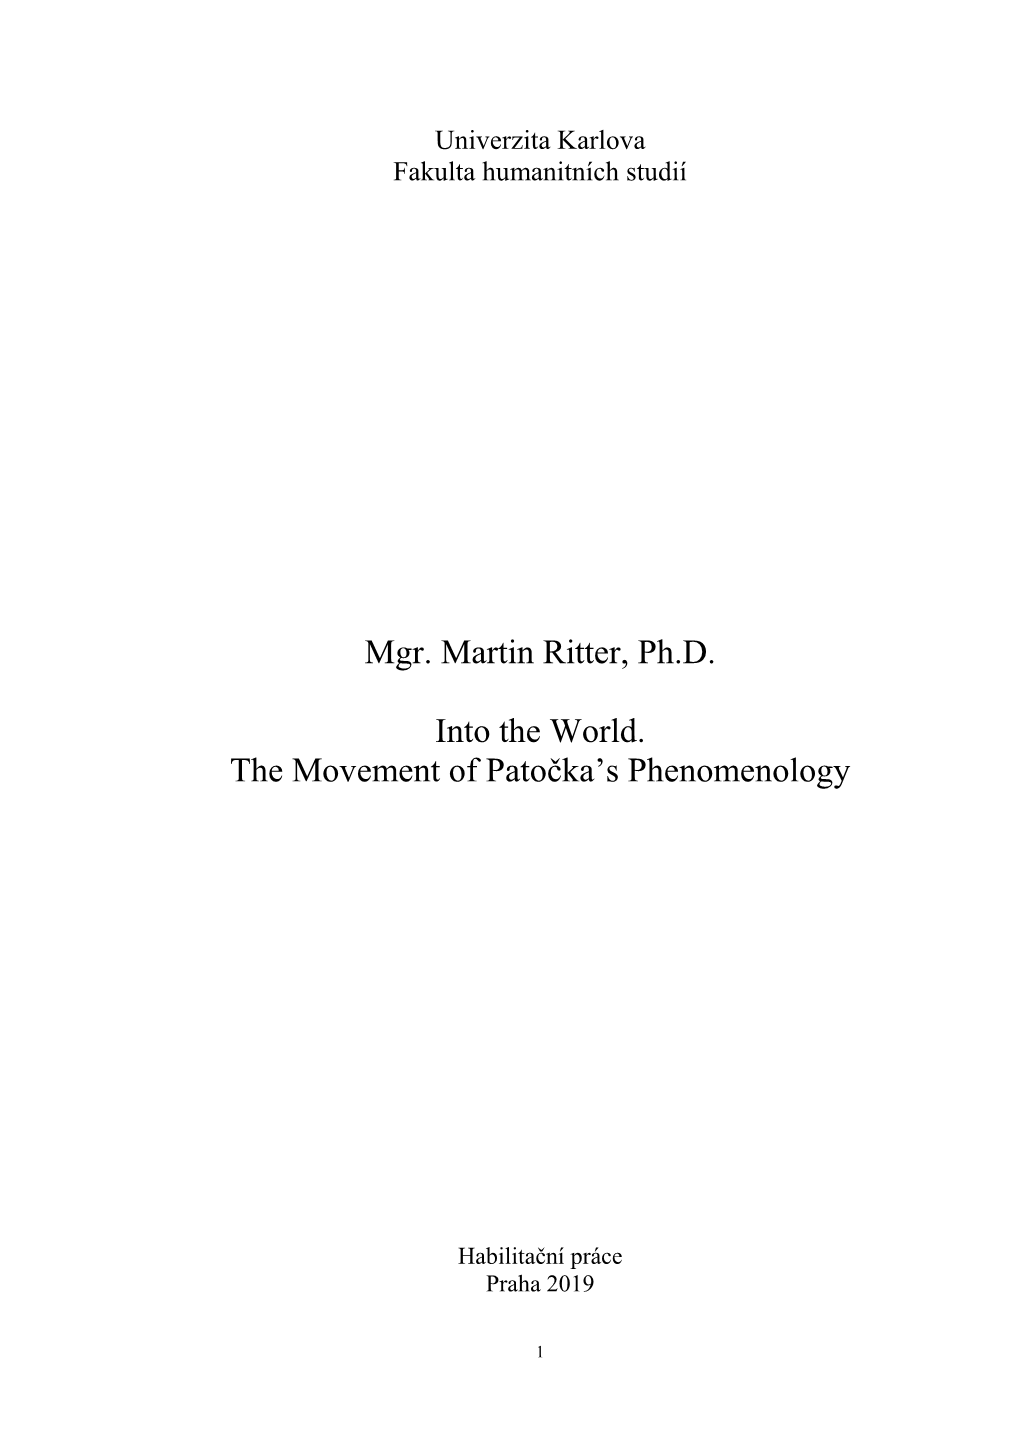 Mgr. Martin Ritter, Ph.D. Into the World. the Movement of Patočka's